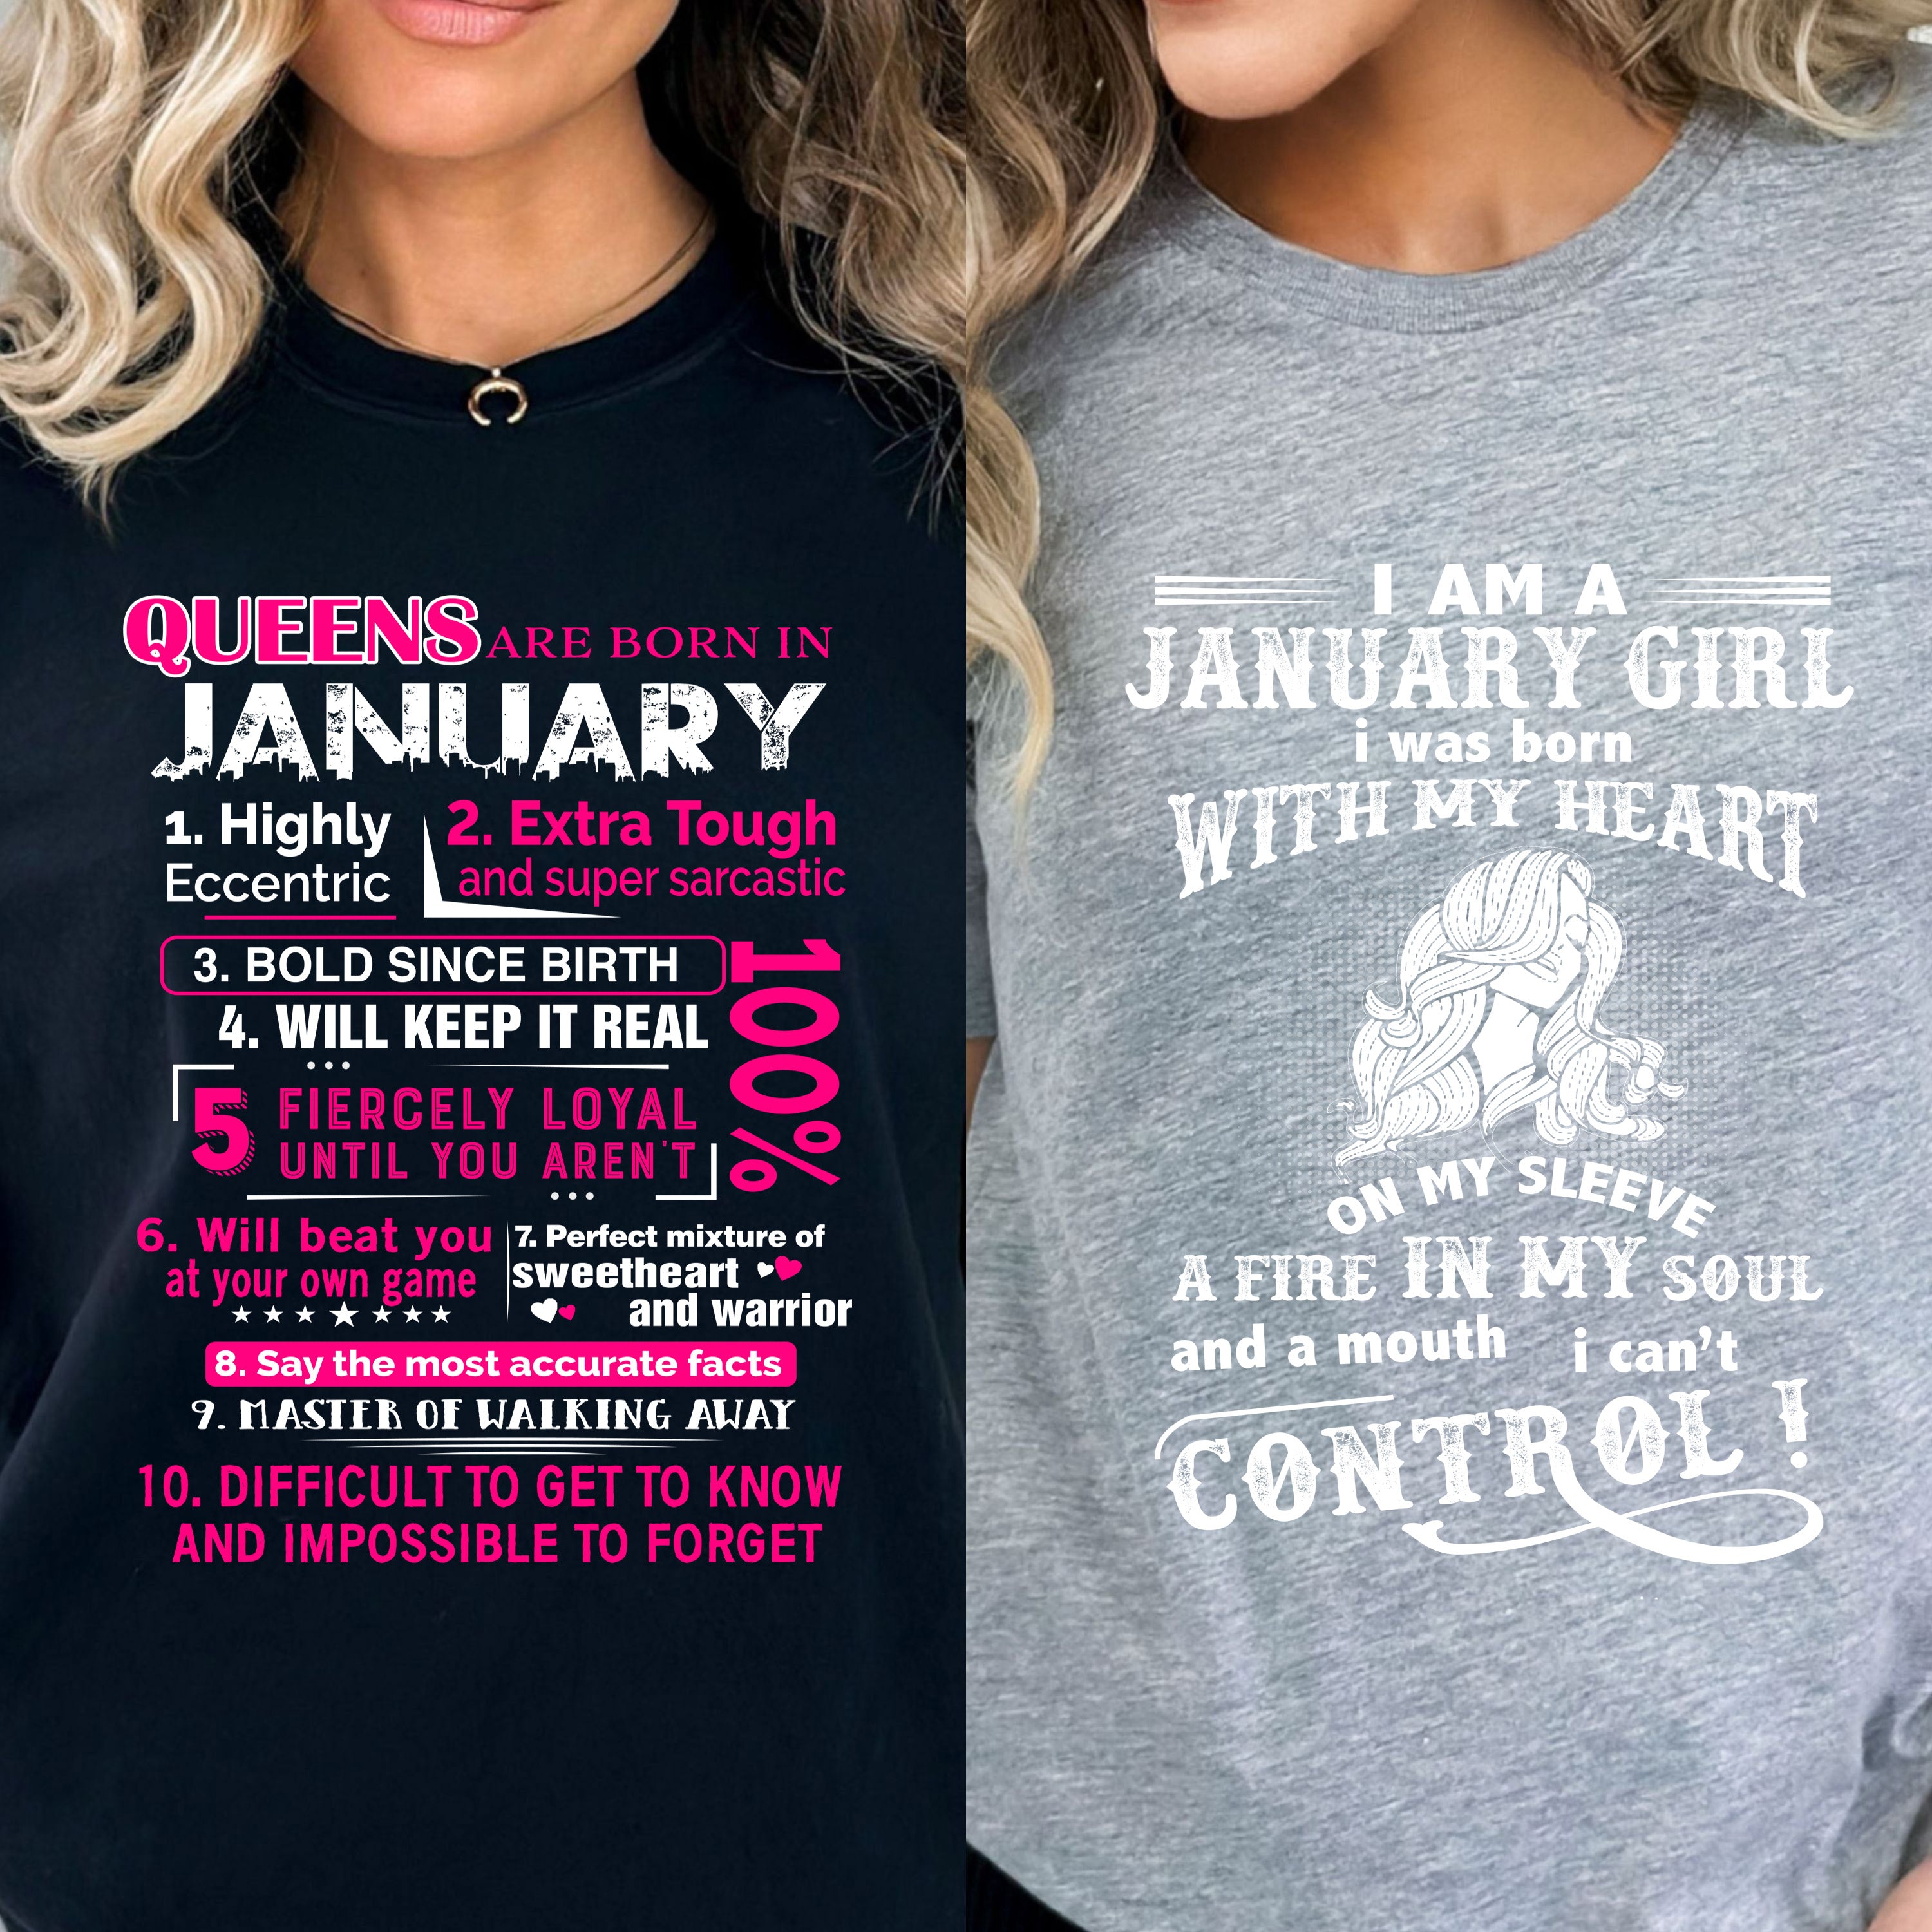 "January Queens + Control-Pack of 2".